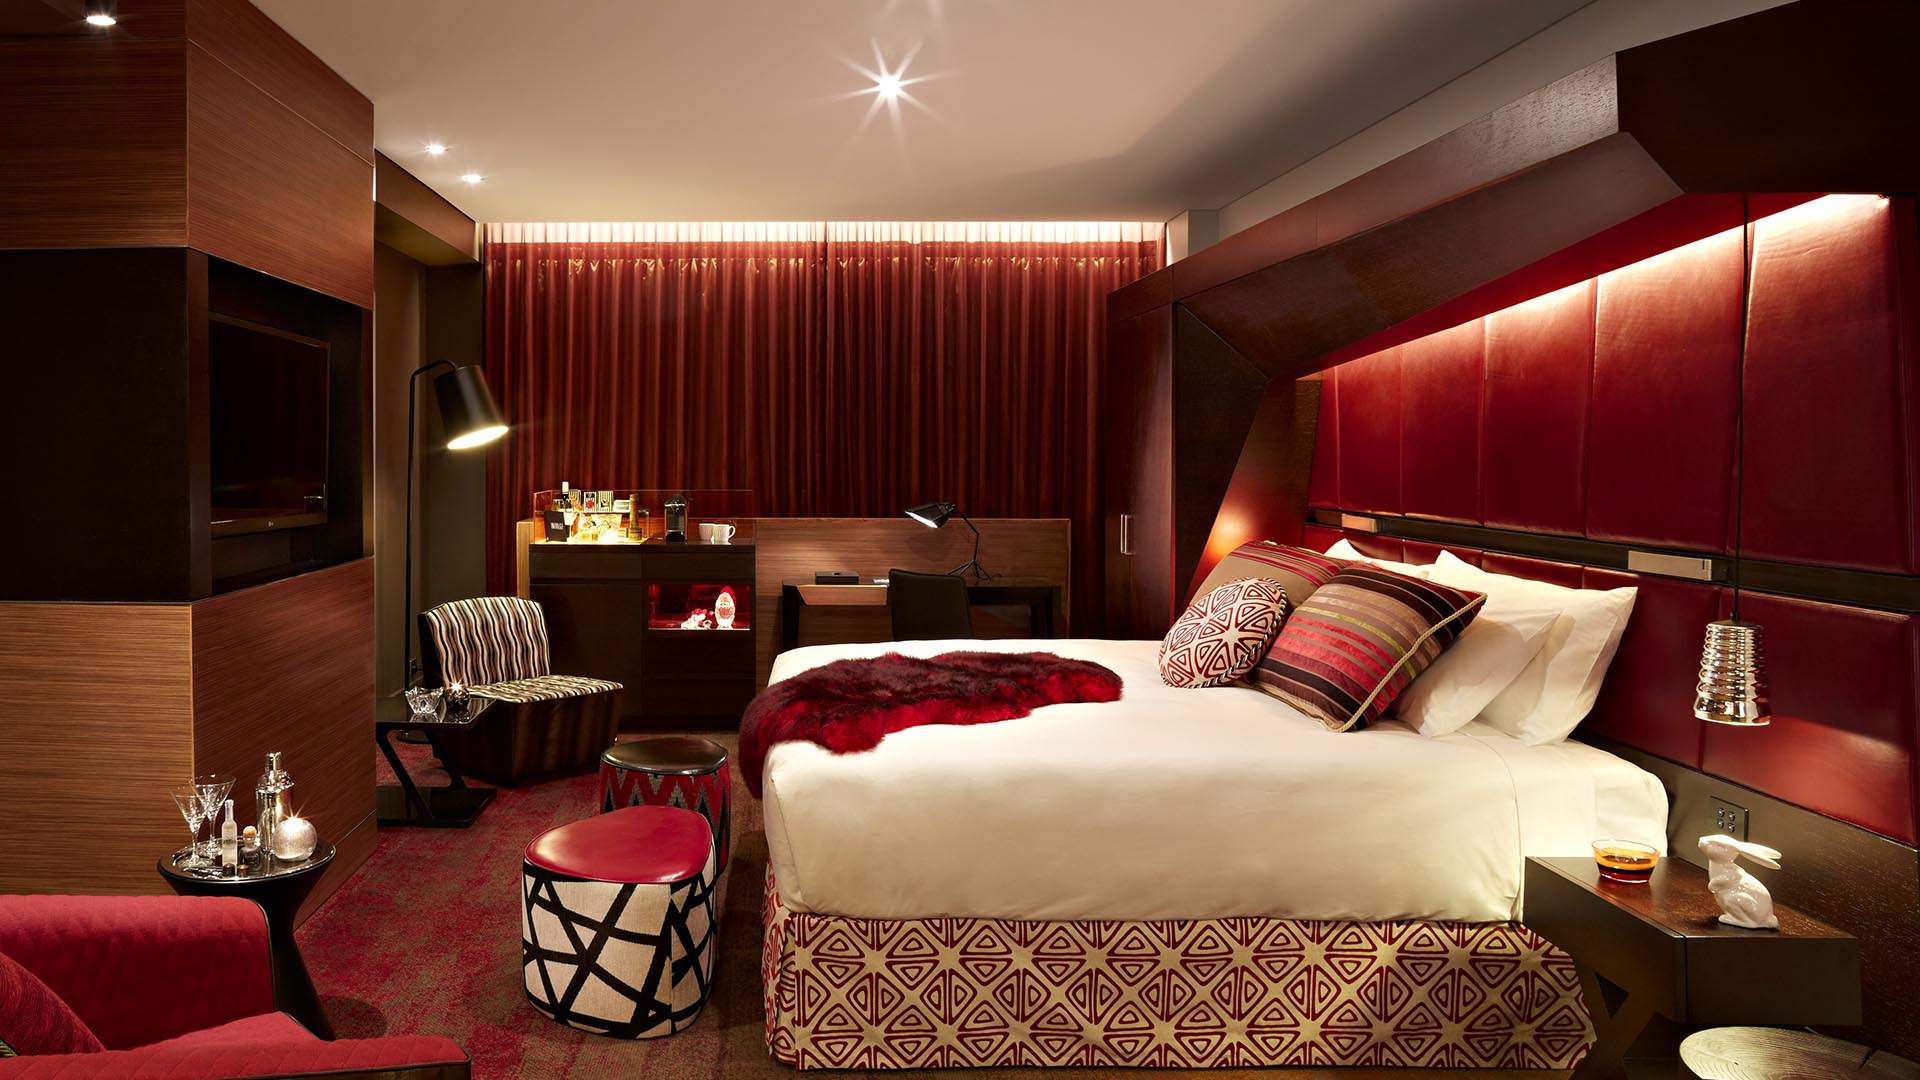 We're Giving Away a Mid-Week Staycation at QT Sydney